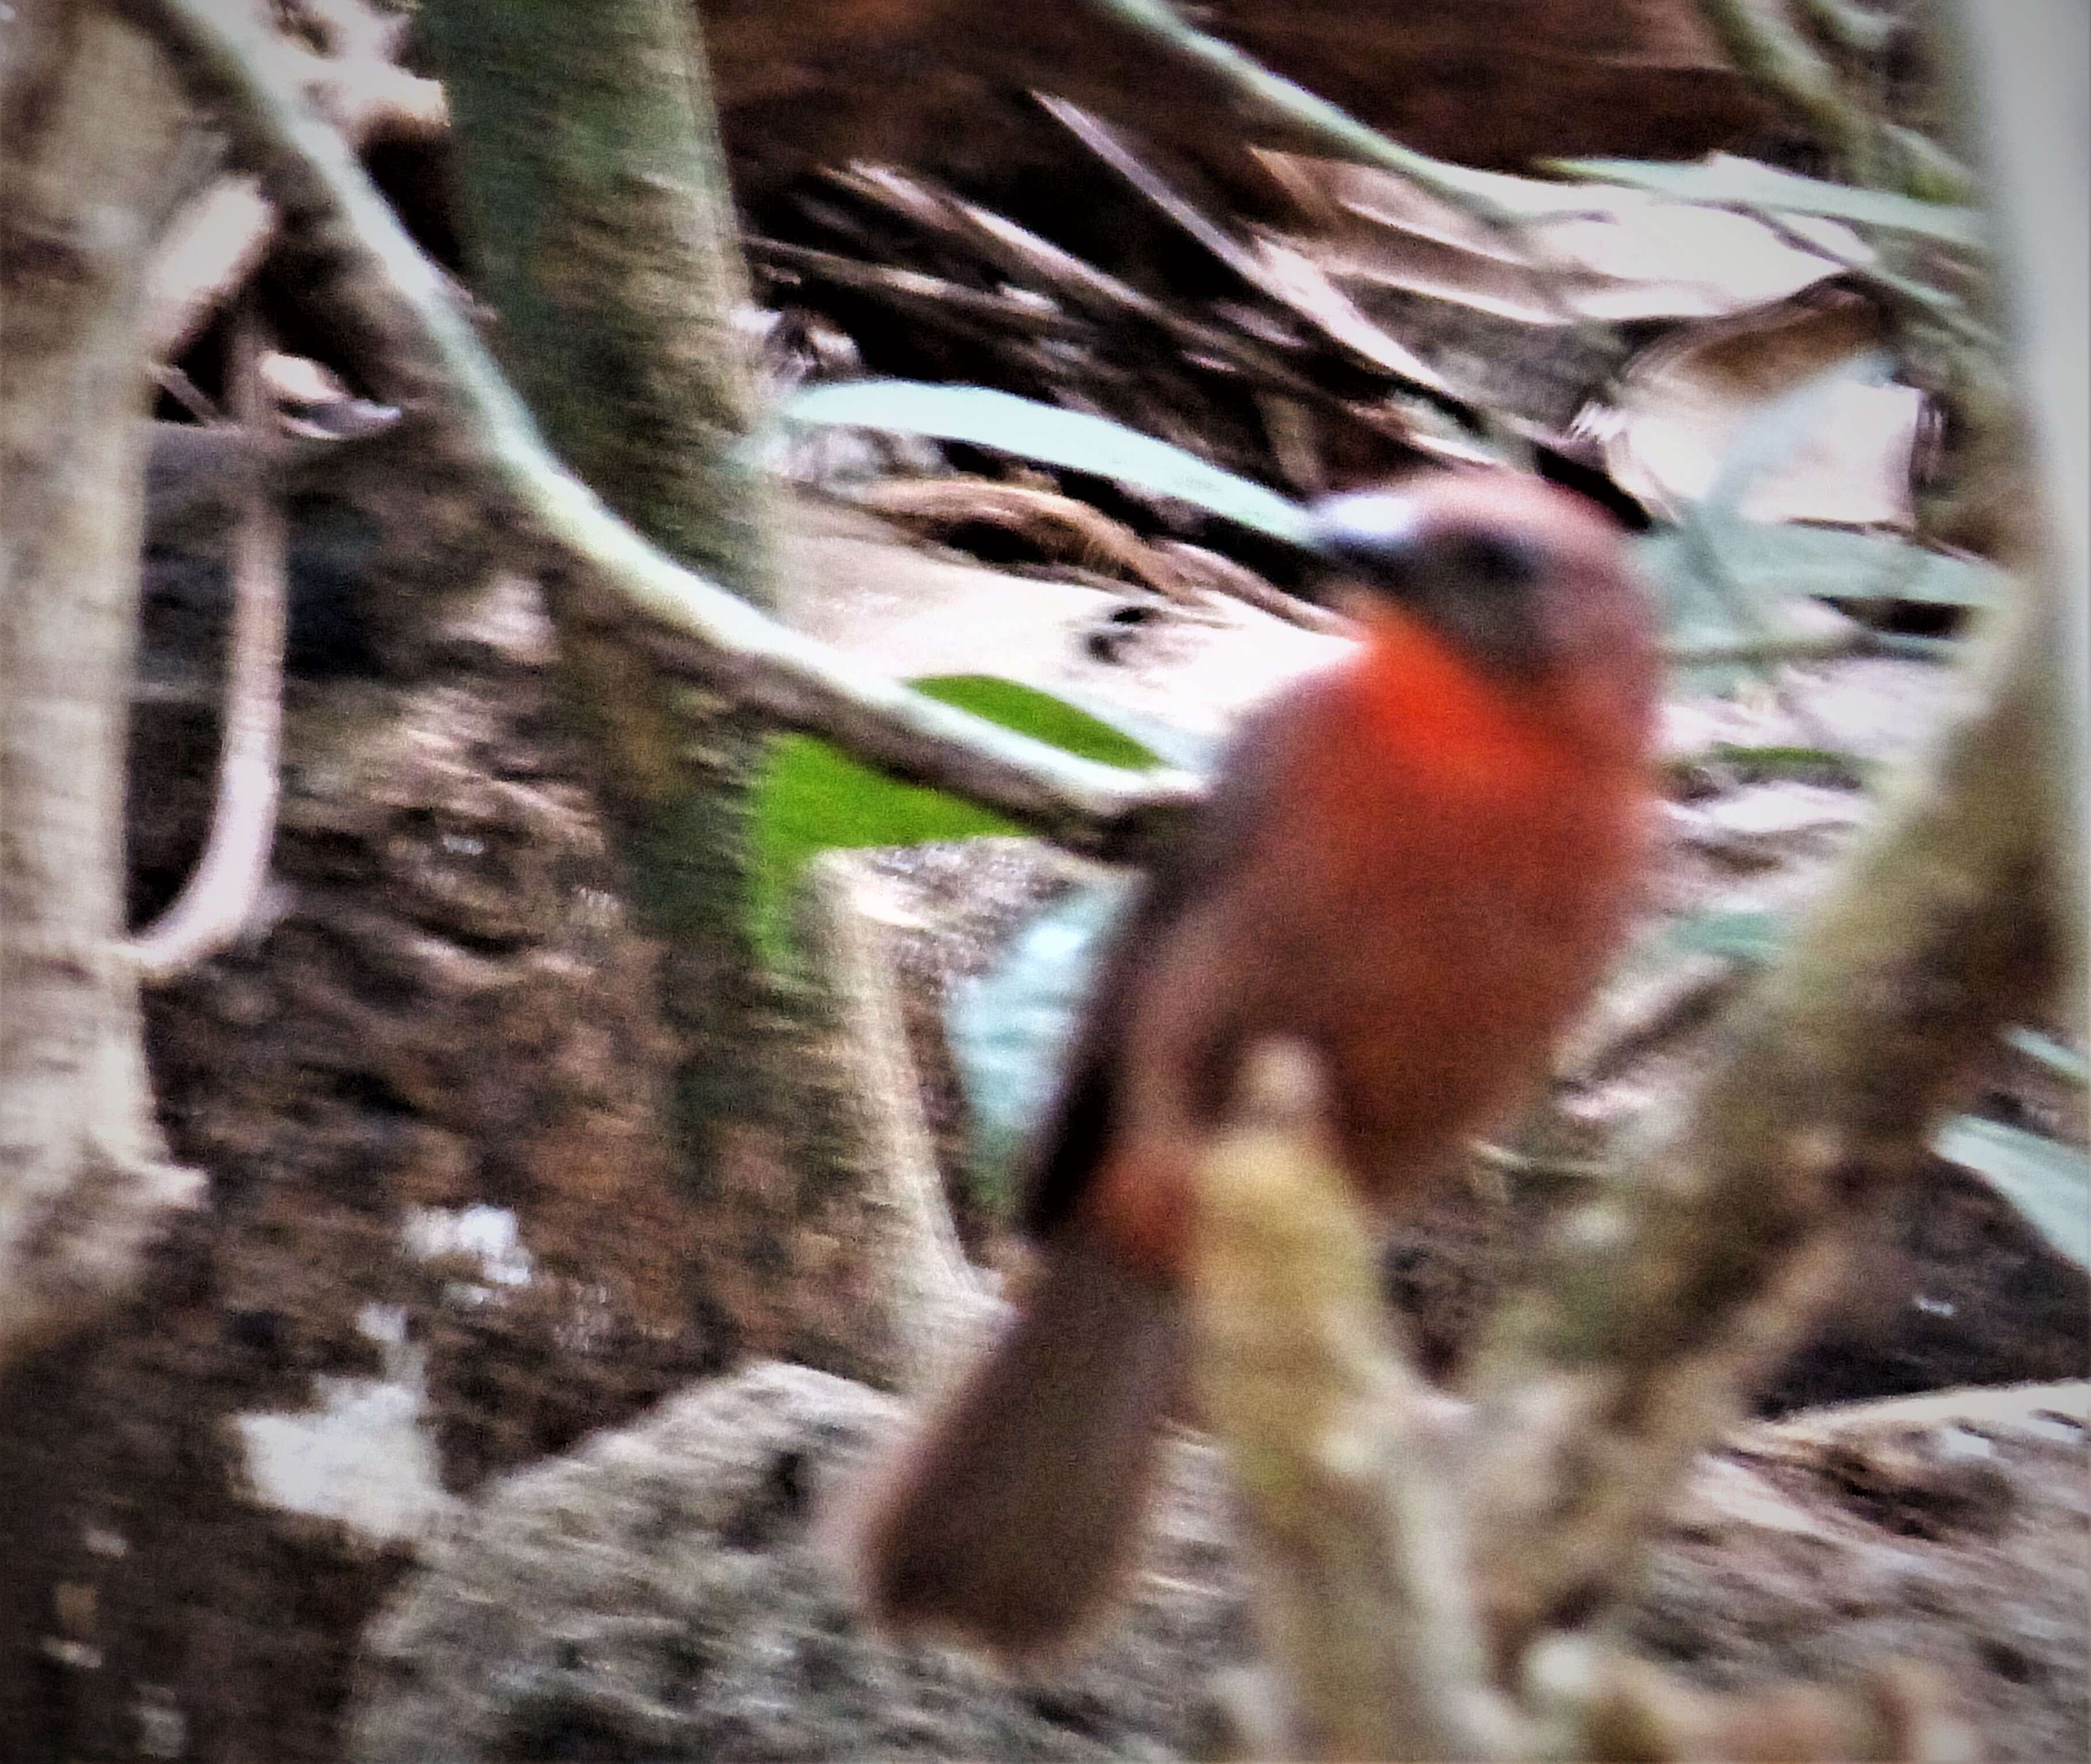 Image of Red-throated Ant Tanager